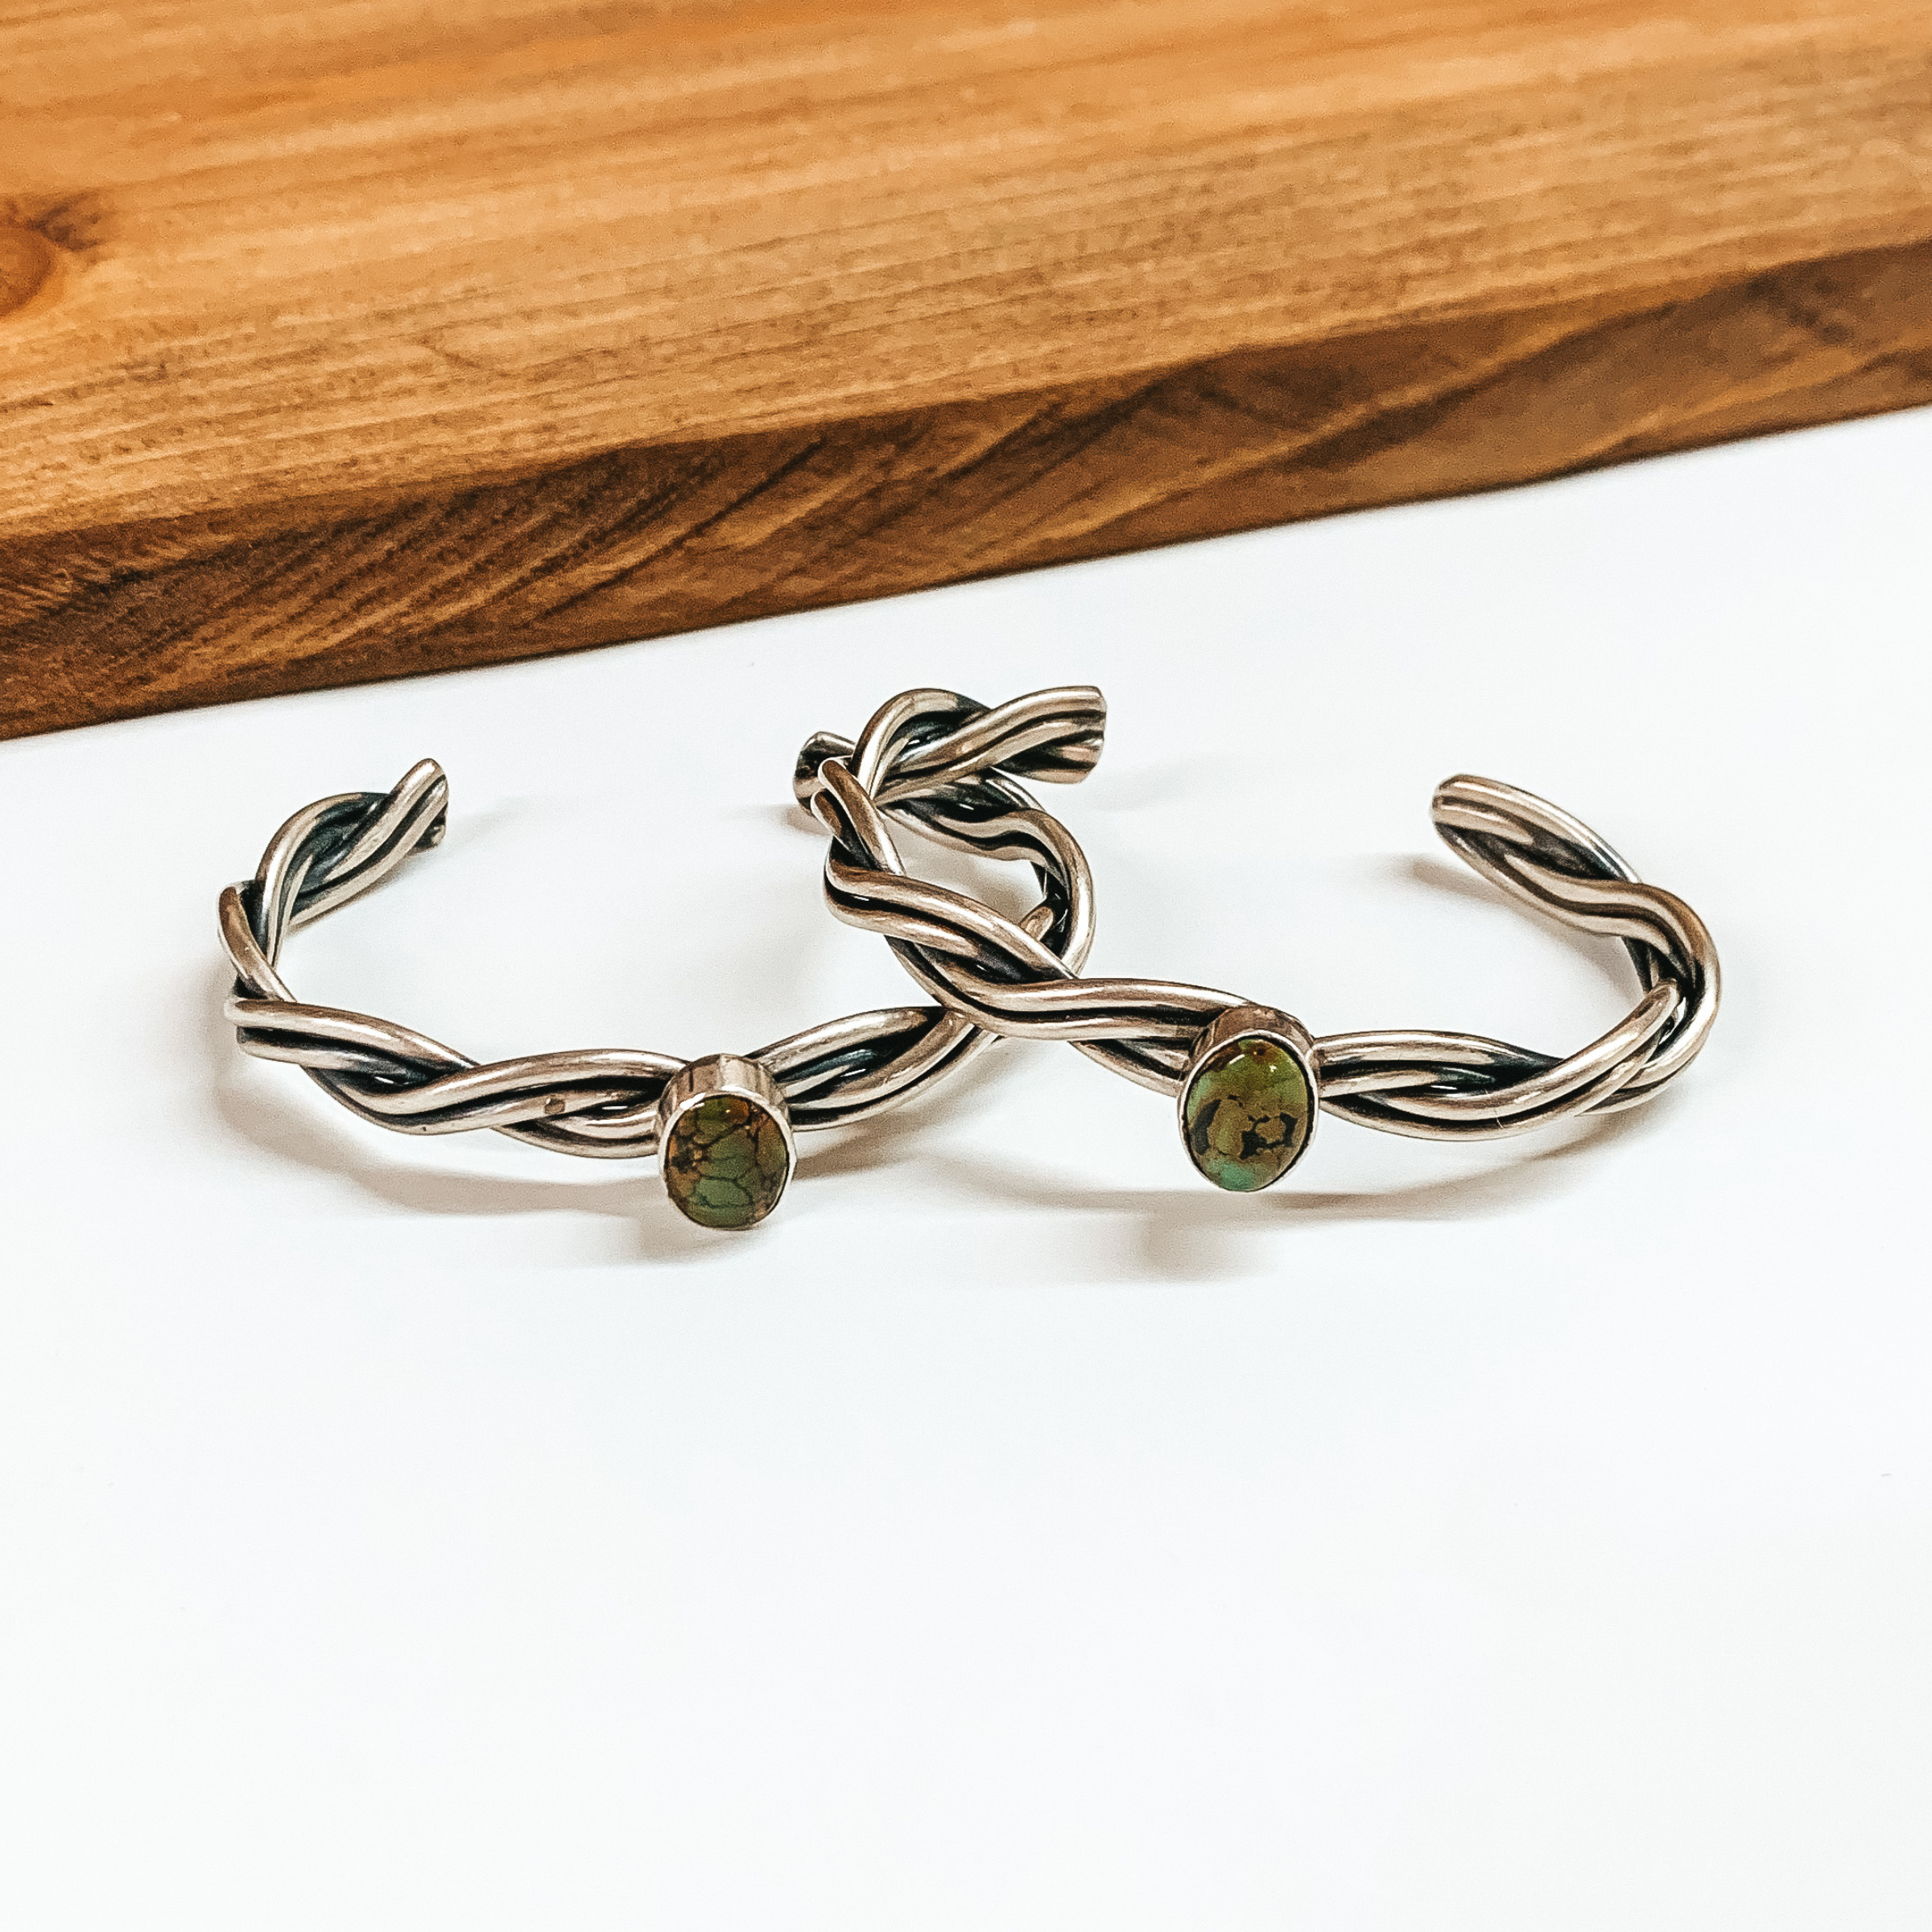 Two silver, rope cuff bracelets with oval center turquoise stones. These bracelets are pictured in front of a wood block on a white background. 